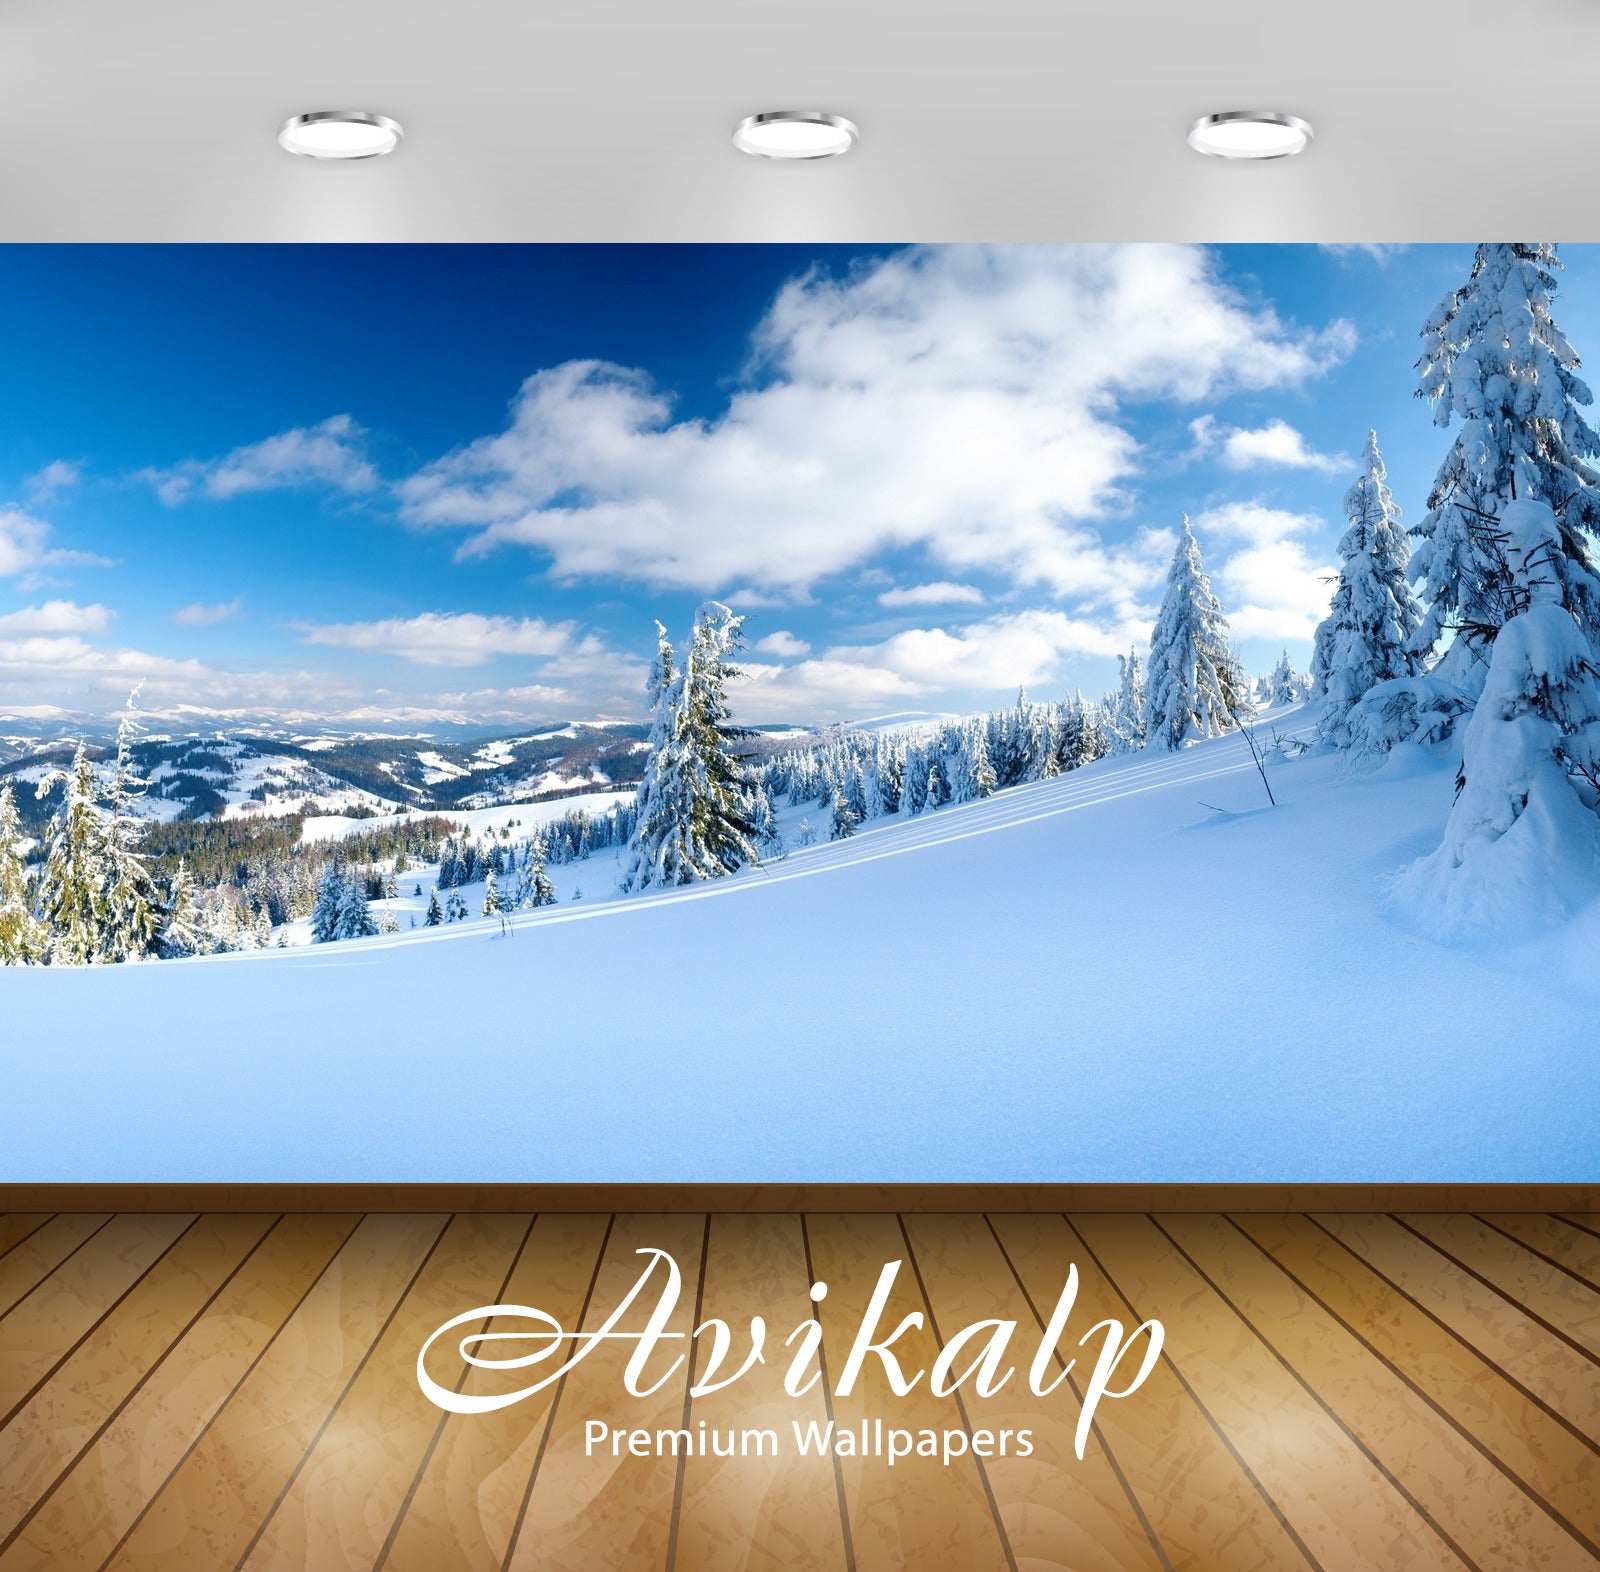 Avikalp Exclusive Awi1526 Beautiful Snow View Full HD Wallpapers for Living room, Hall, Kids Room, K